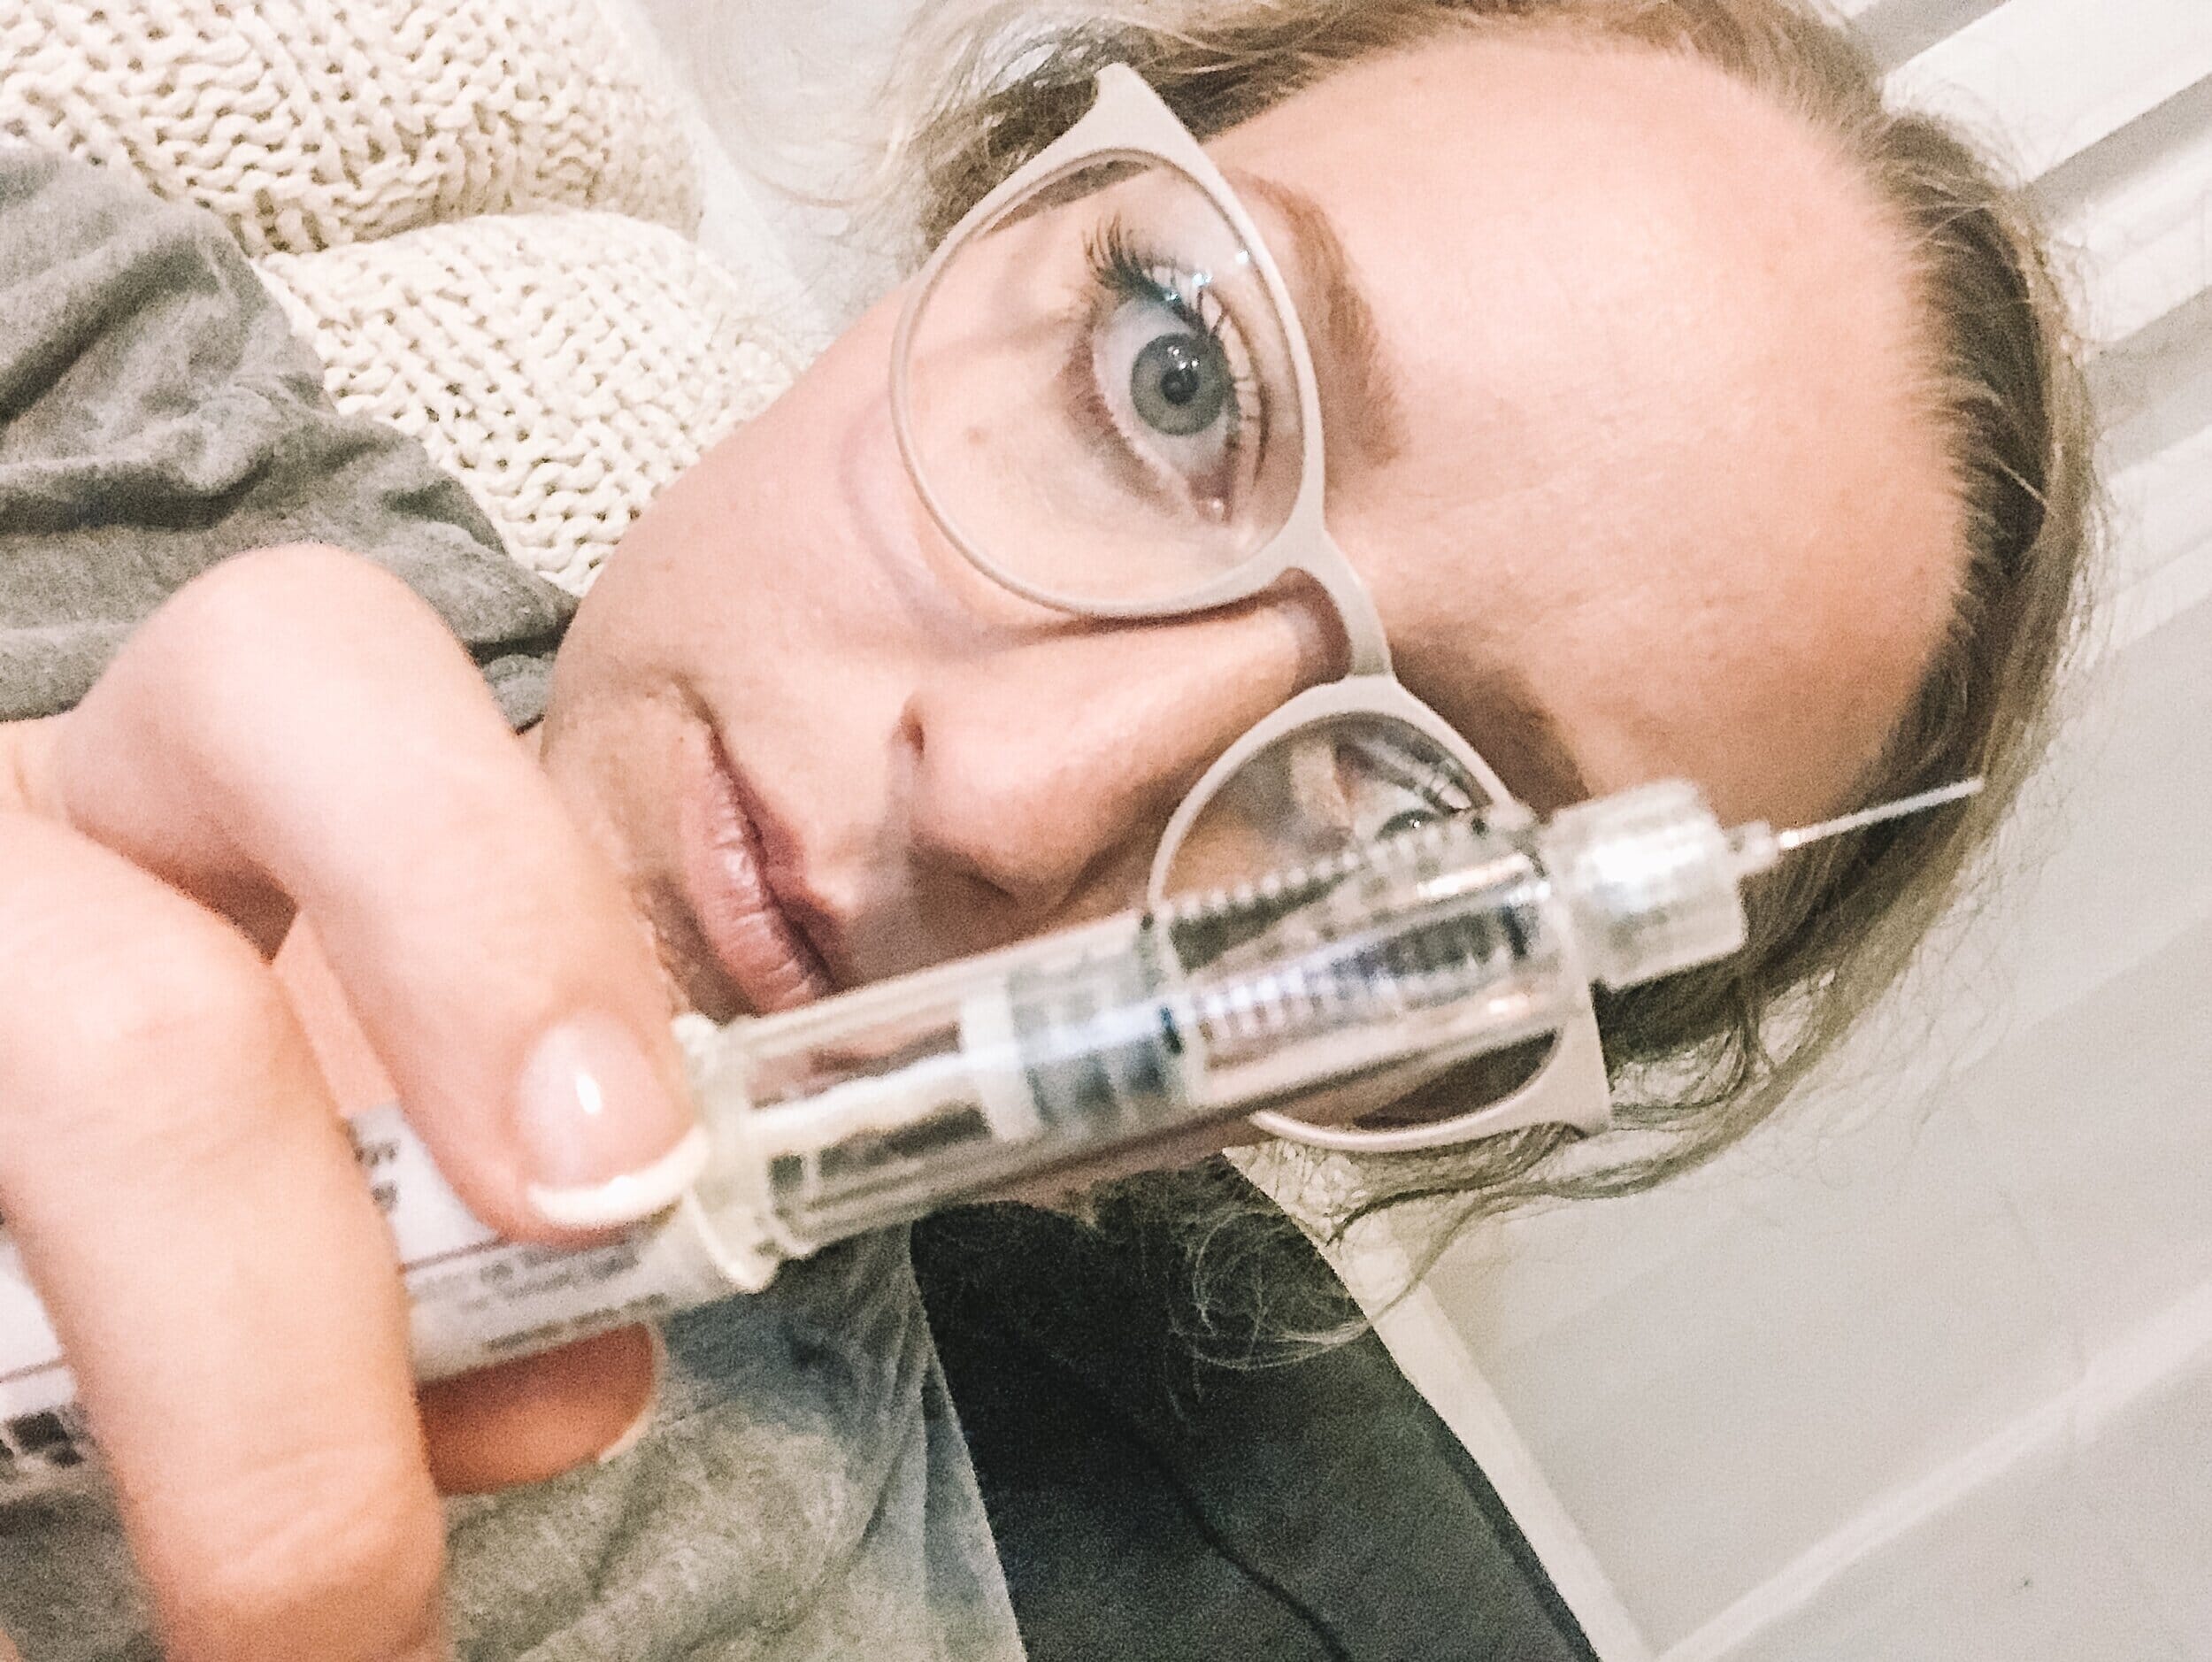 fertility warrior rachel sloan with ivf needle in front of her face